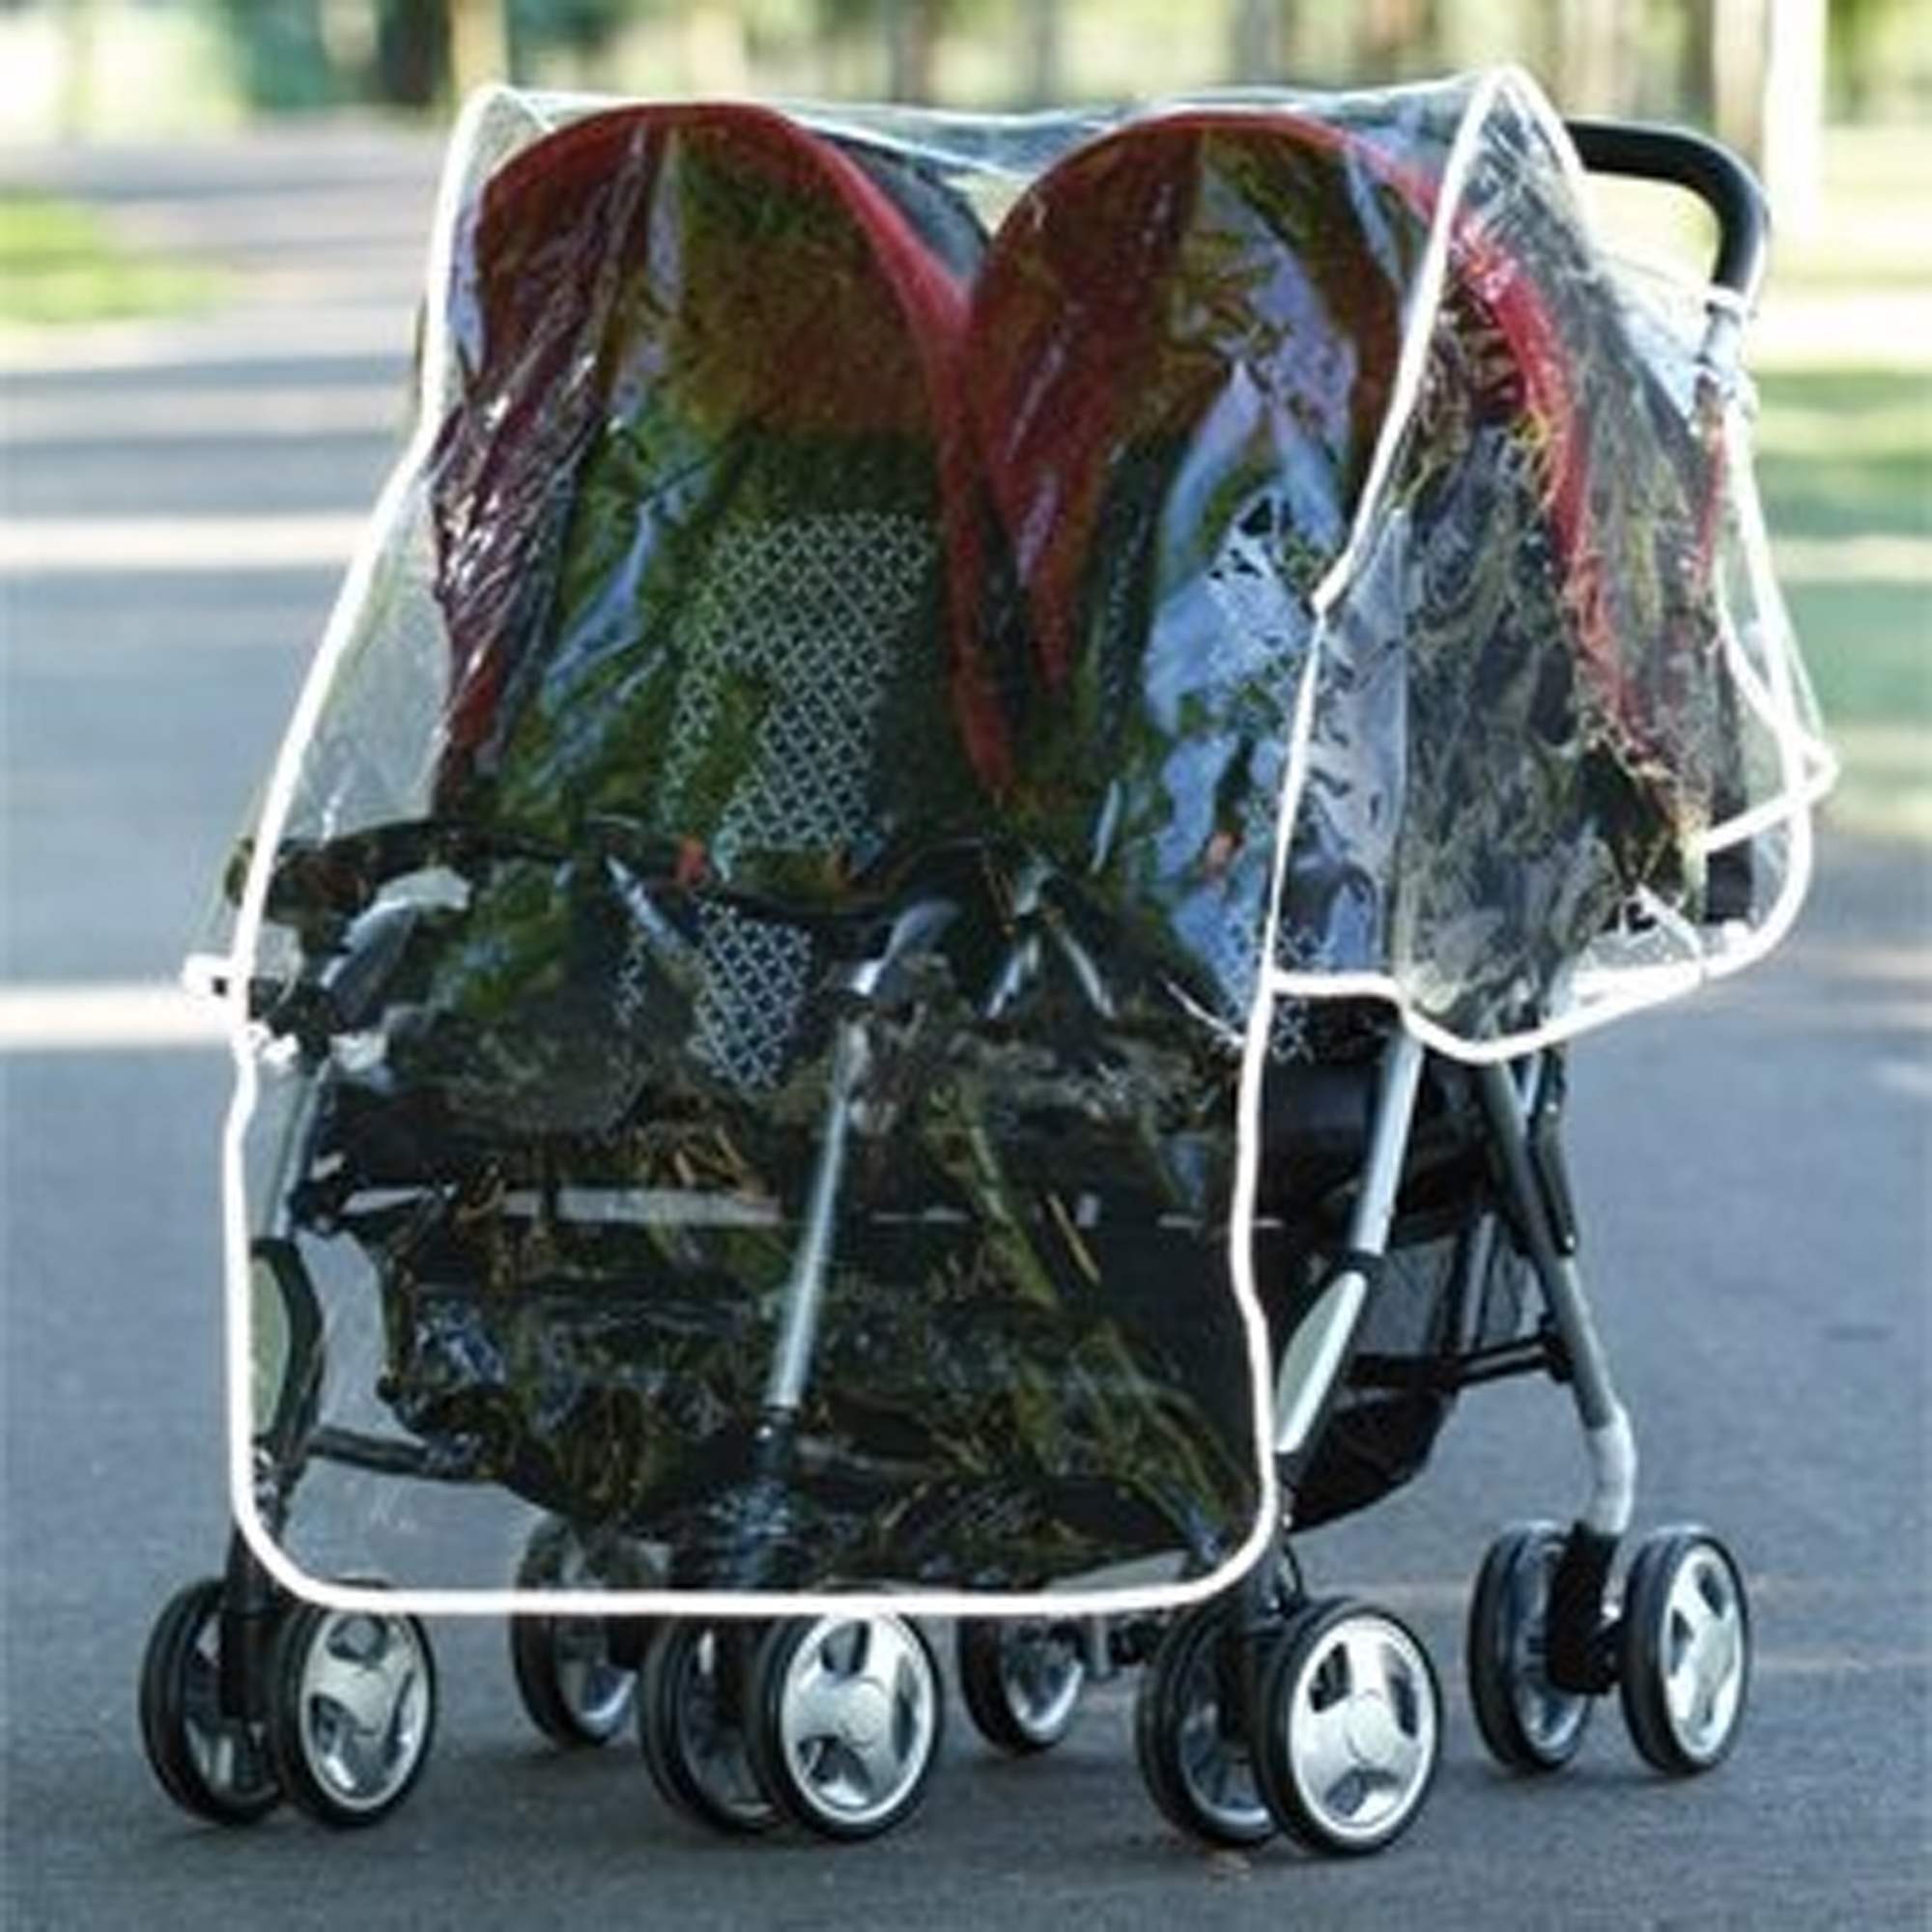 Diono Double Buggy Stroller Pushchair Rain Cover Universal Fit Plastic Protector 677726602605 eBay